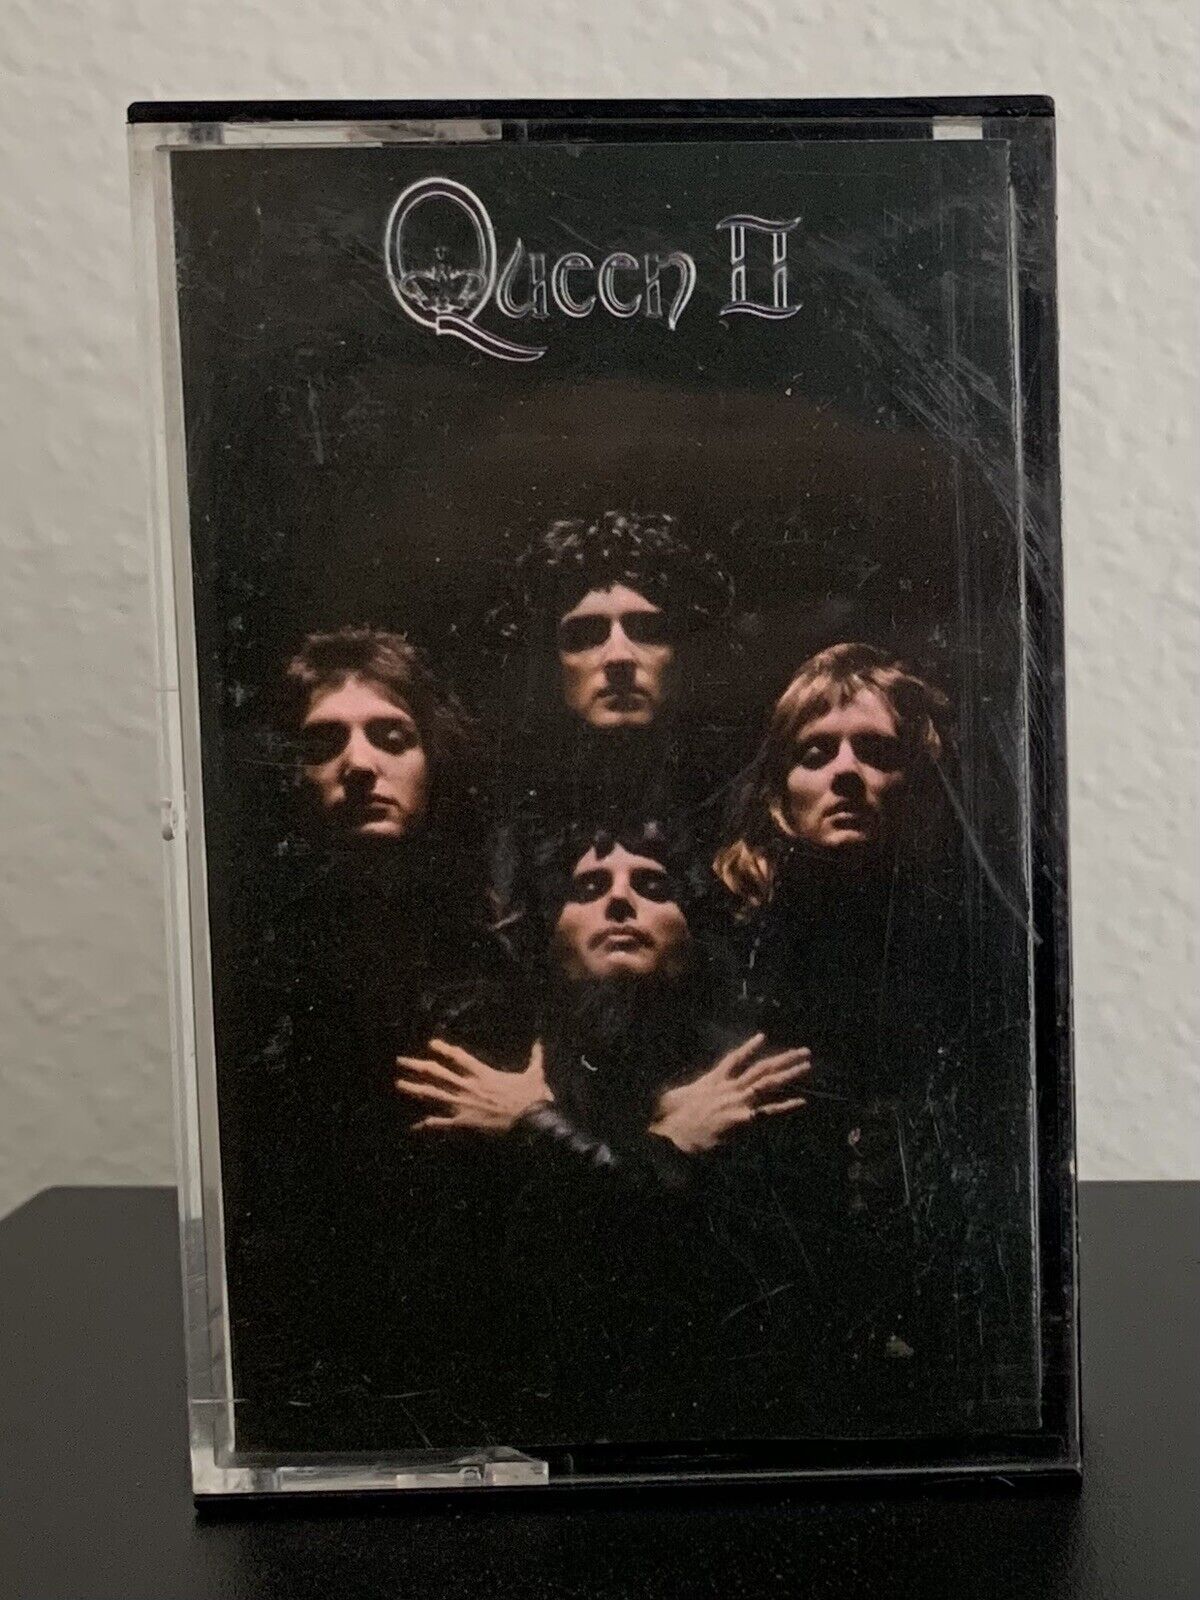 QUEEN - Queen II, Cassette Tape - Fully Play Tested